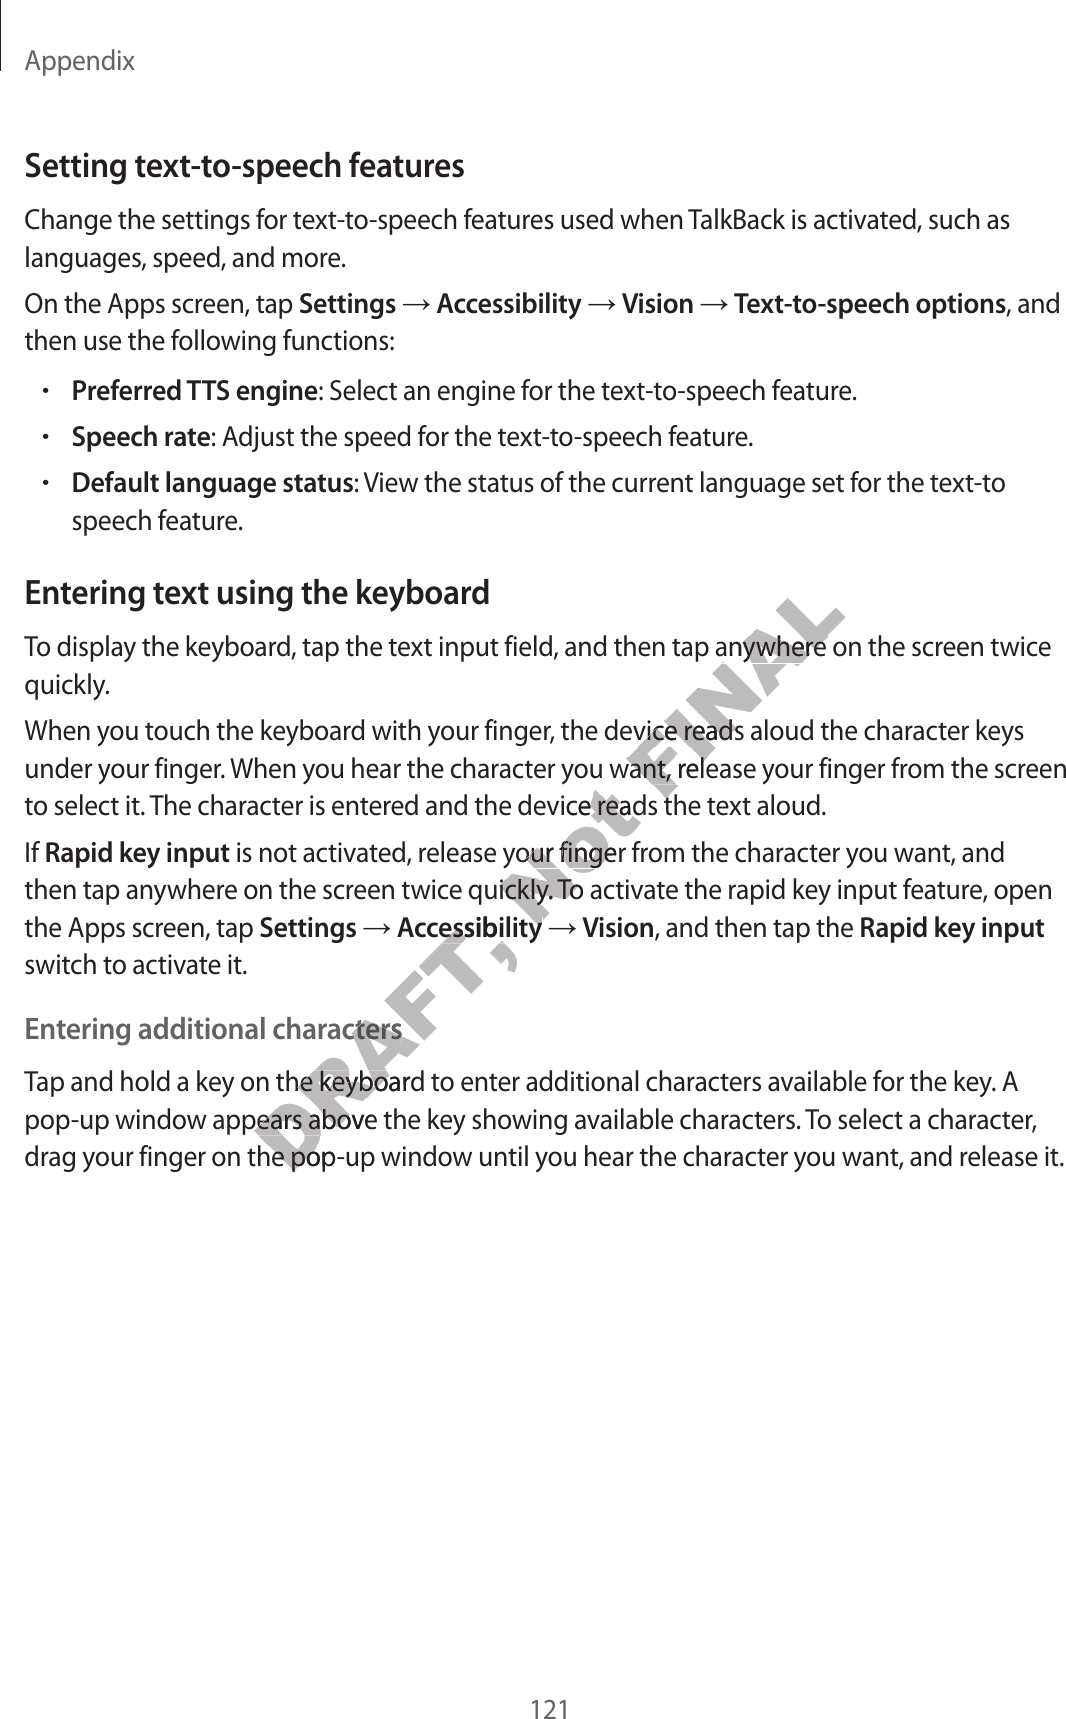 Appendix121Setting text-to-speech featuresChange the settings for text-to-speech features used when TalkBack is activated, such as languages, speed, and more.On the Apps screen, tap Settings  Accessibility  Vision  Text-to-speech options, and then use the following functions:•Preferred TTS engine: Select an engine for the text-to-speech feature.•Speech rate: Adjust the speed for the text-to-speech feature.•Default language status: View the status of the current language set for the text-tospeech feature.Entering text using the keyboardTo display the keyboard, tap the text input field, and then tap anywhere on the screen twice quickly.When you touch the keyboard with your finger, the device reads aloud the character keys under your finger. When you hear the character you want, release your finger from the screen to select it. The character is entered and the device reads the text aloud.If Rapid key input is not activated, release your finger from the character you want, and then tap anywhere on the screen twice quickly. To activate the rapid key input feature, open the Apps screen, tap Settings  Accessibility  Vision, and then tap the Rapid key input switch to activate it.Entering additional charactersTap and hold a key on the keyboard to enter additional characters available for the key. A pop-up window appears above the key showing available characters. To select a character, drag your finger on the pop-up window until you hear the character you want, and release it.ccessibilitccessibilitering additional charactersering additional charactersDRAFT, ap and hold a key on the keyboard tap and hold a key on the keyboarw appears above the key show appears abovDRAFT, our finger on the pop-up windoour finger on the popNot ou wed and the device reads the ted and the device reads the telease your finger frelease your finger fre quickly. To ace quickly. To acessibilityessibilityFINAL, and then tap anywhere on the scr, and then tap anywhere on the scr, the device reads aloud the char, the device reads aloud the charou want, release you want, release yeads the teads the t